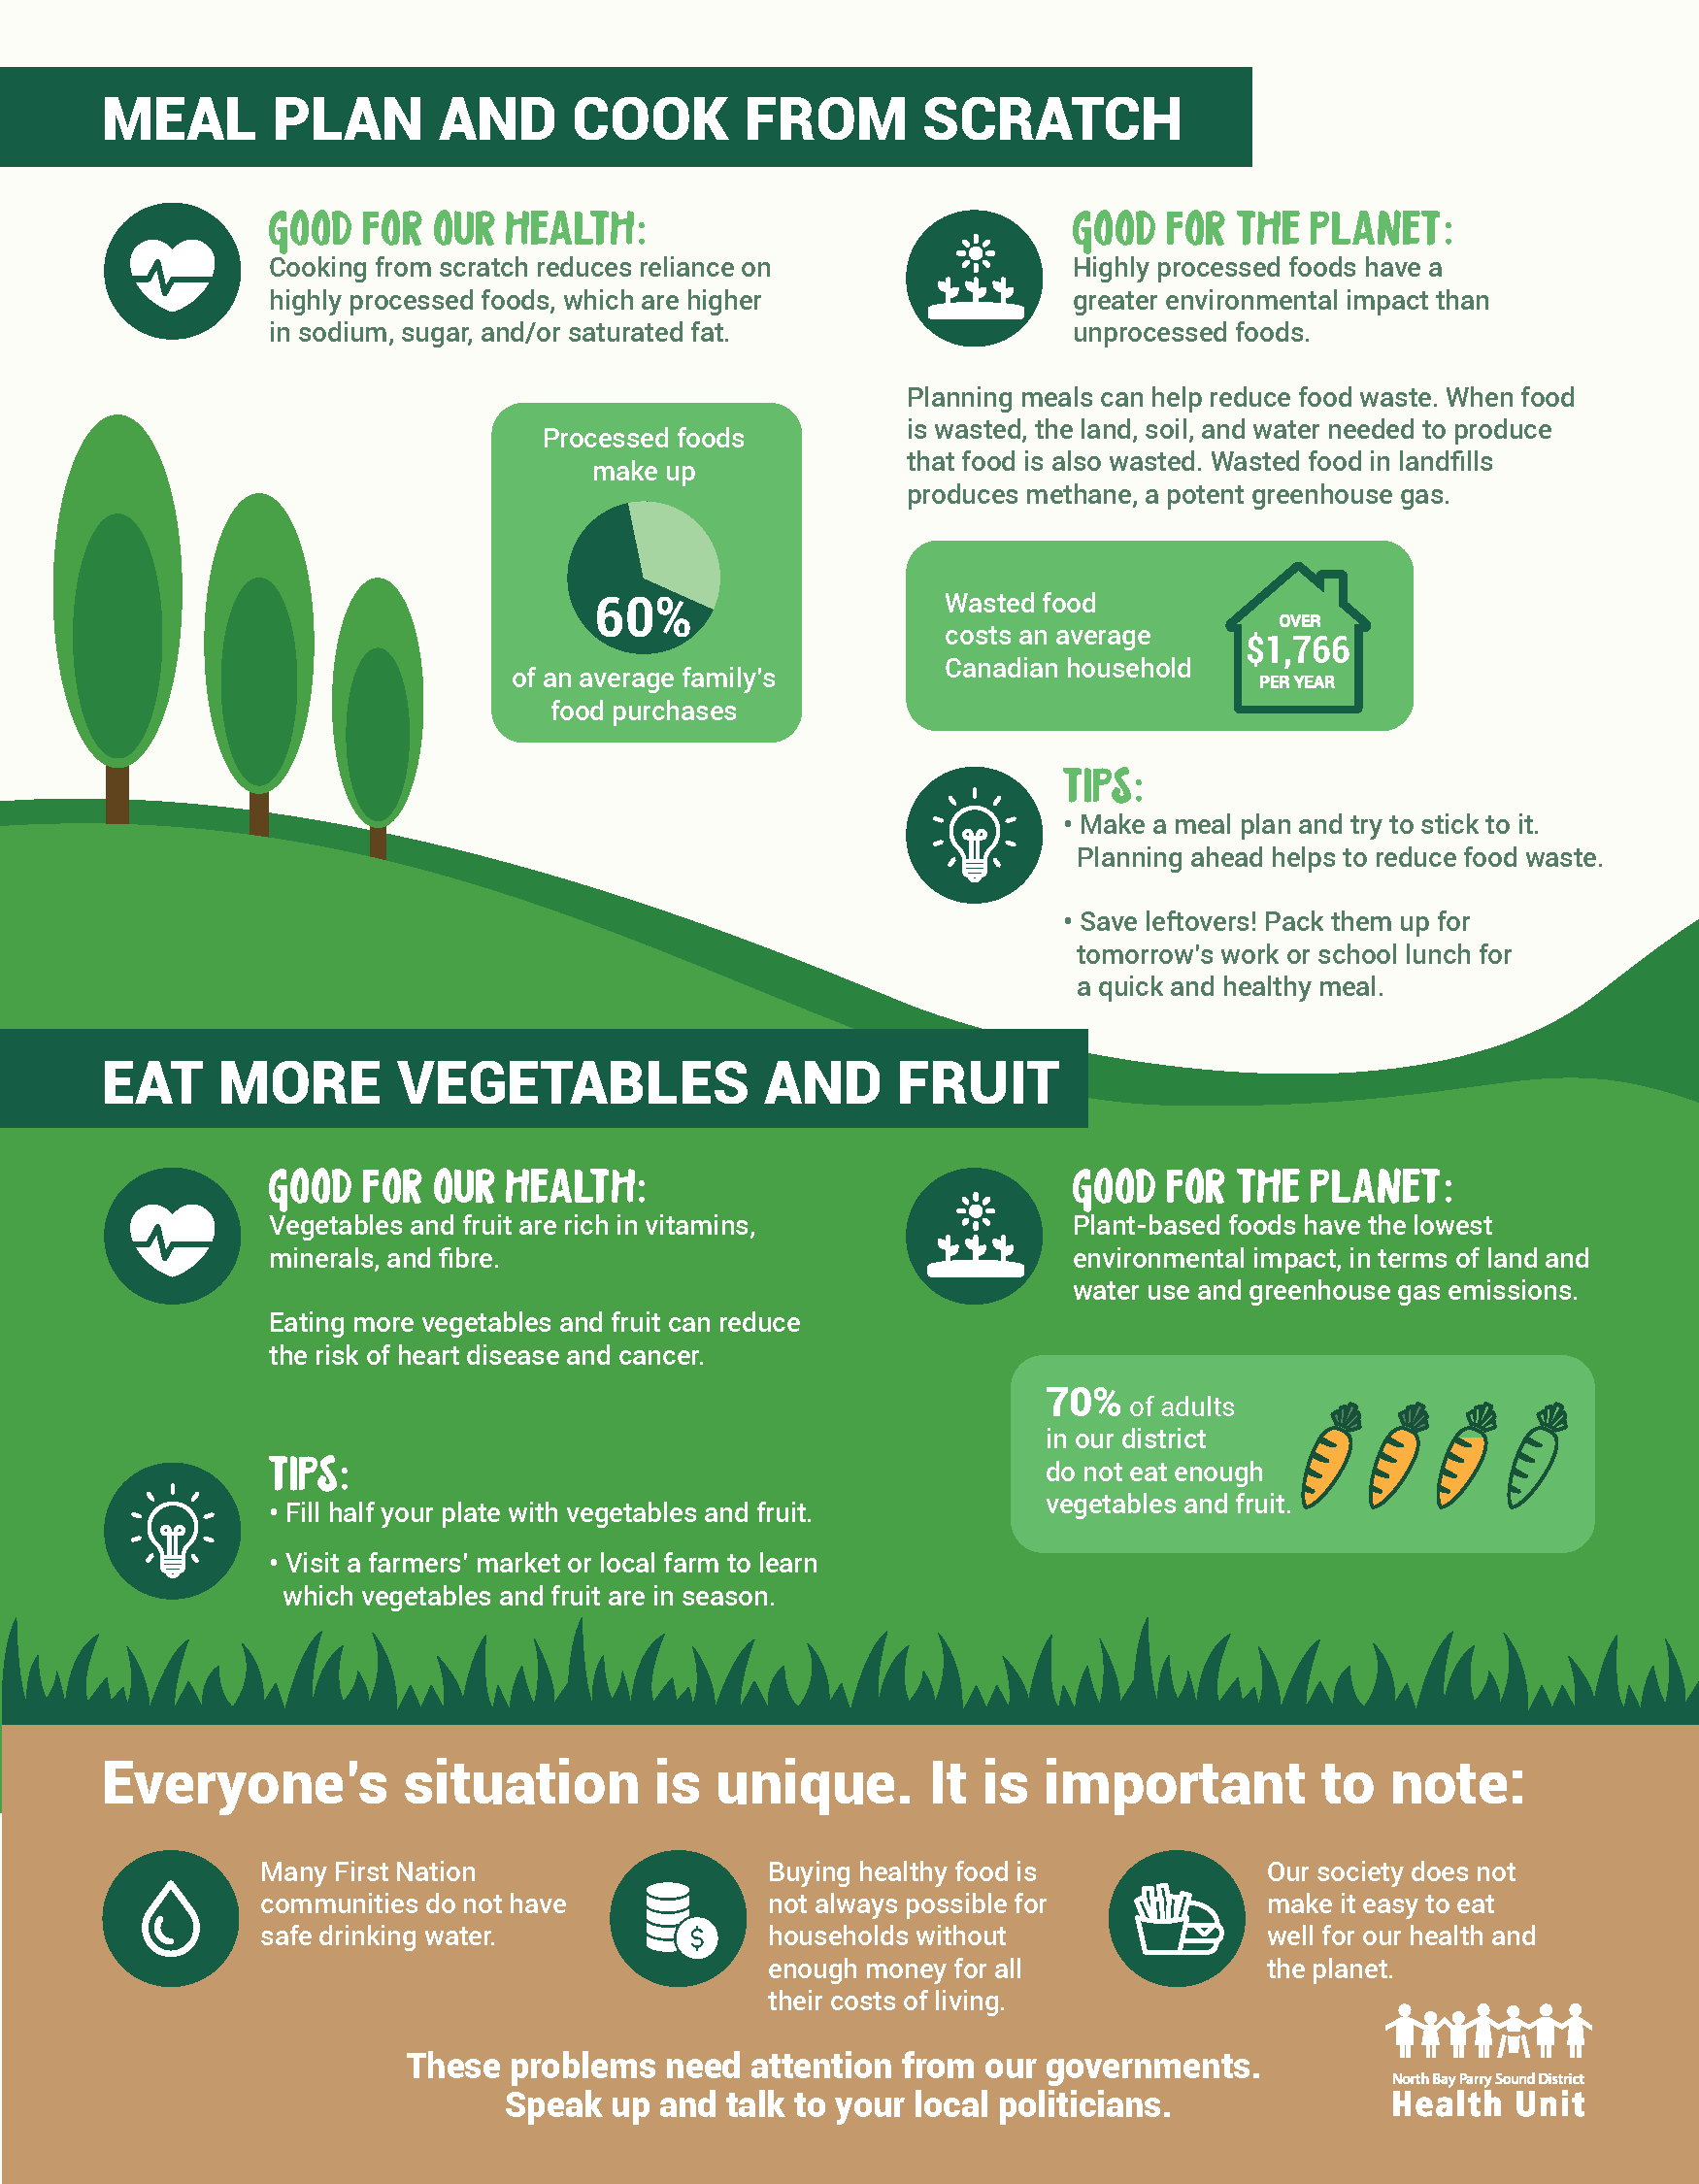 Image with tips for environmentally conscious eating